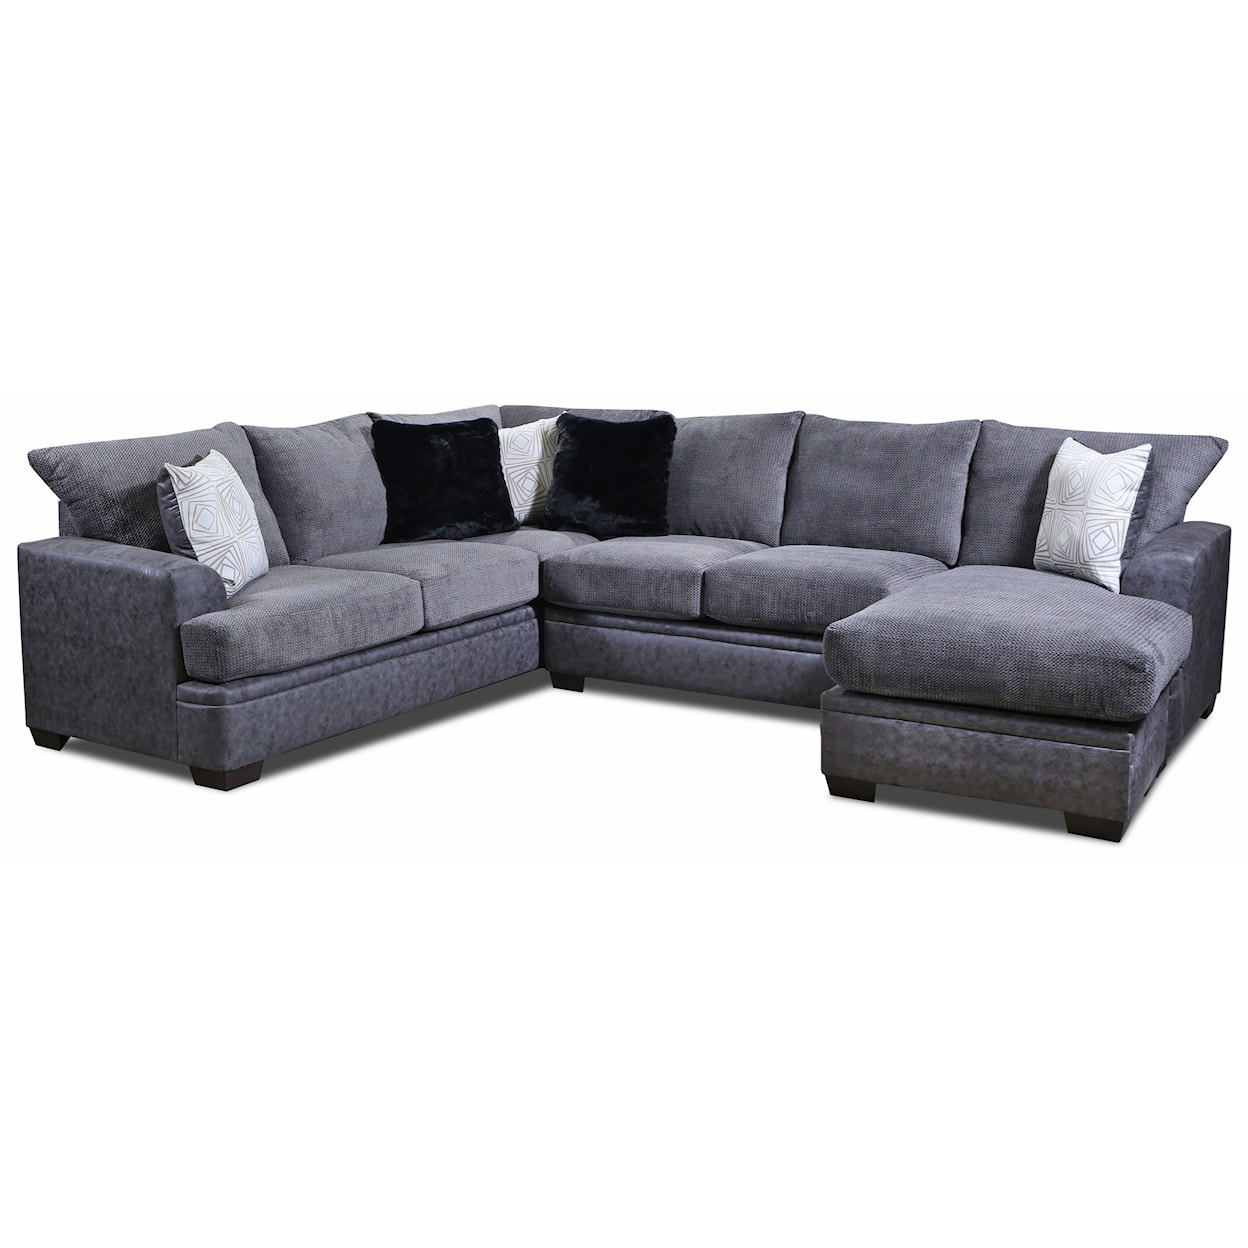 Peak Living 6800 Sectional Sofa with Right Side Chaise